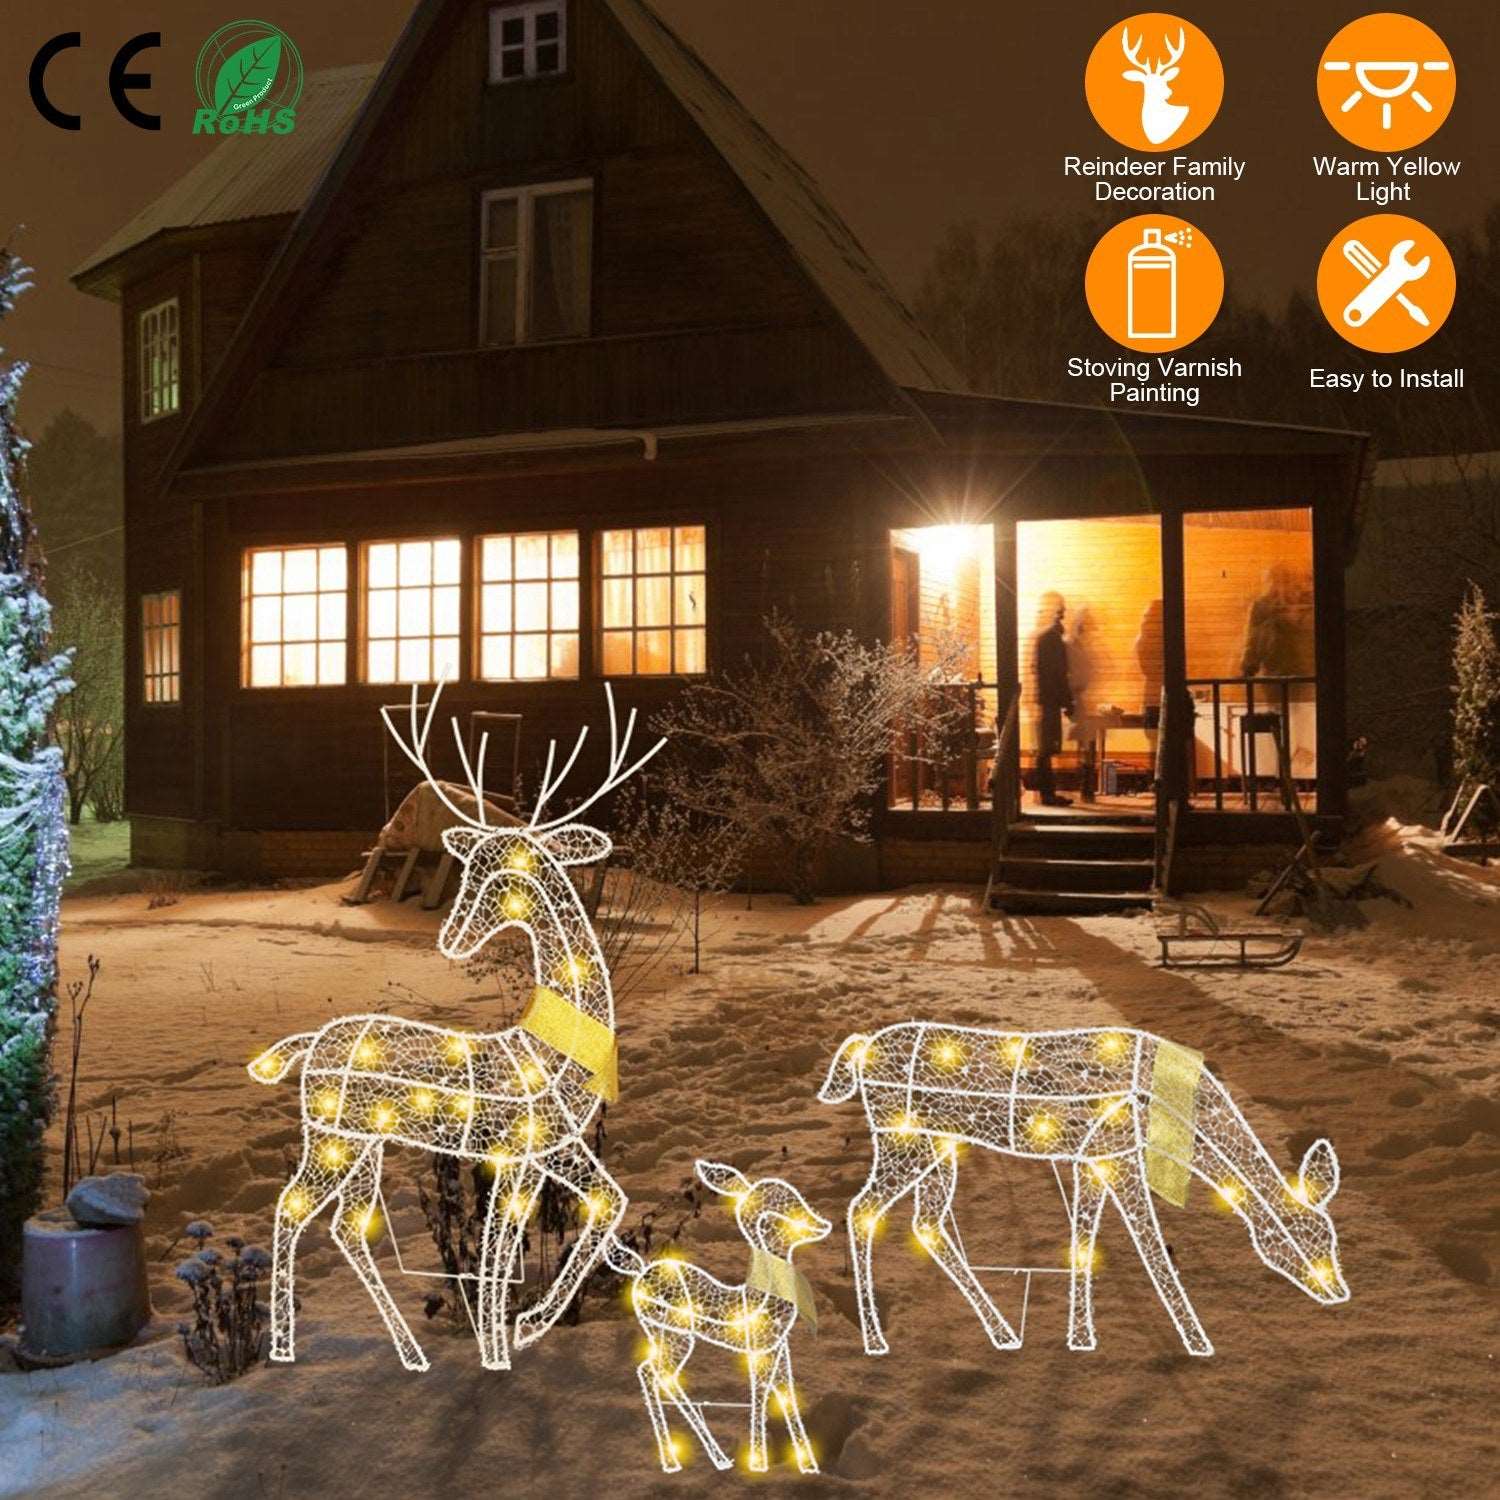 3 Sets of Christmas Deer Decor for Outdoor or Indoor